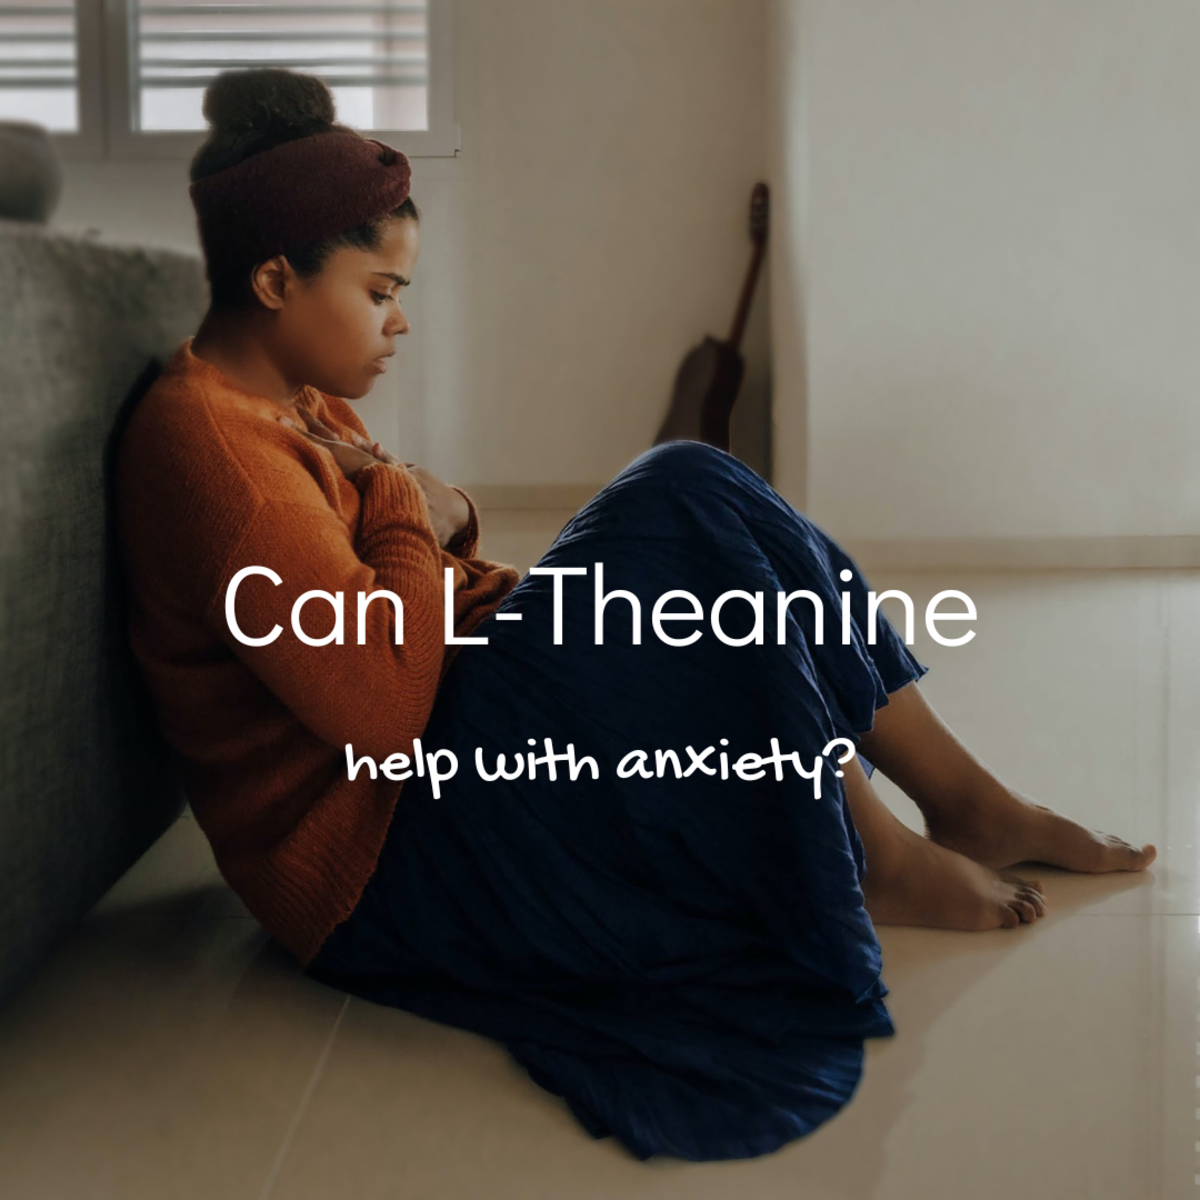 How to Stop Anxiety With L-Theanine